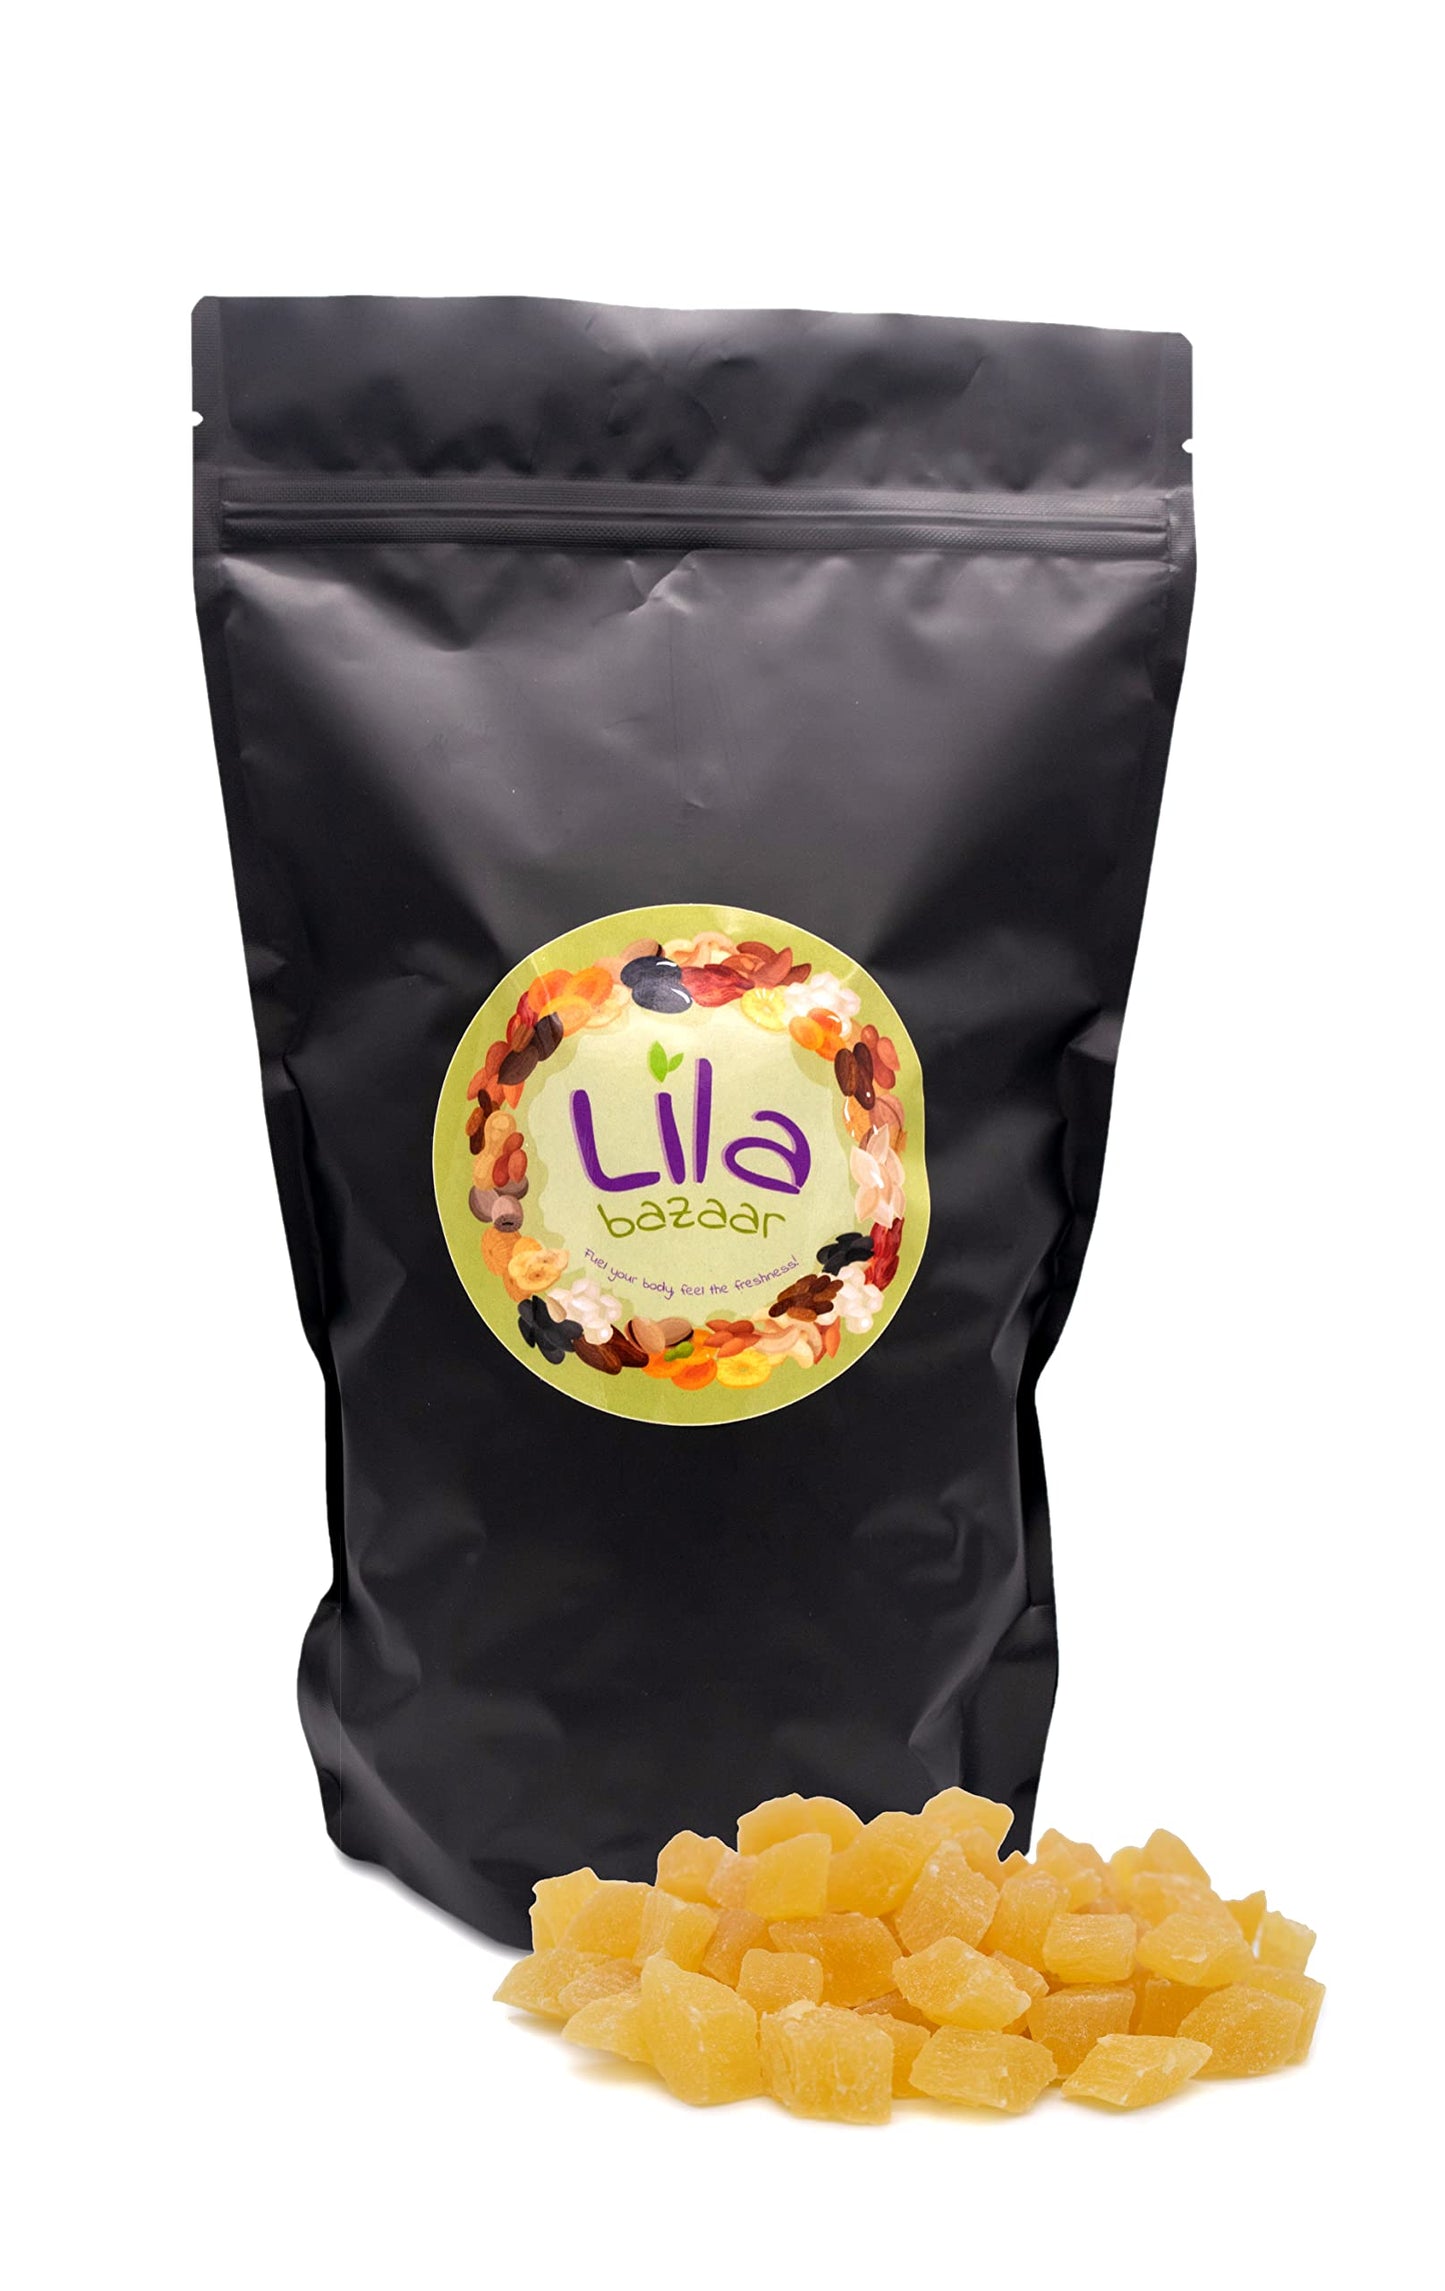 LILA BAZAAR - Dried Pineapple Chunks 2LB | Natural Taste, Fresh and Super Healthy | Packed in Resealable Bag